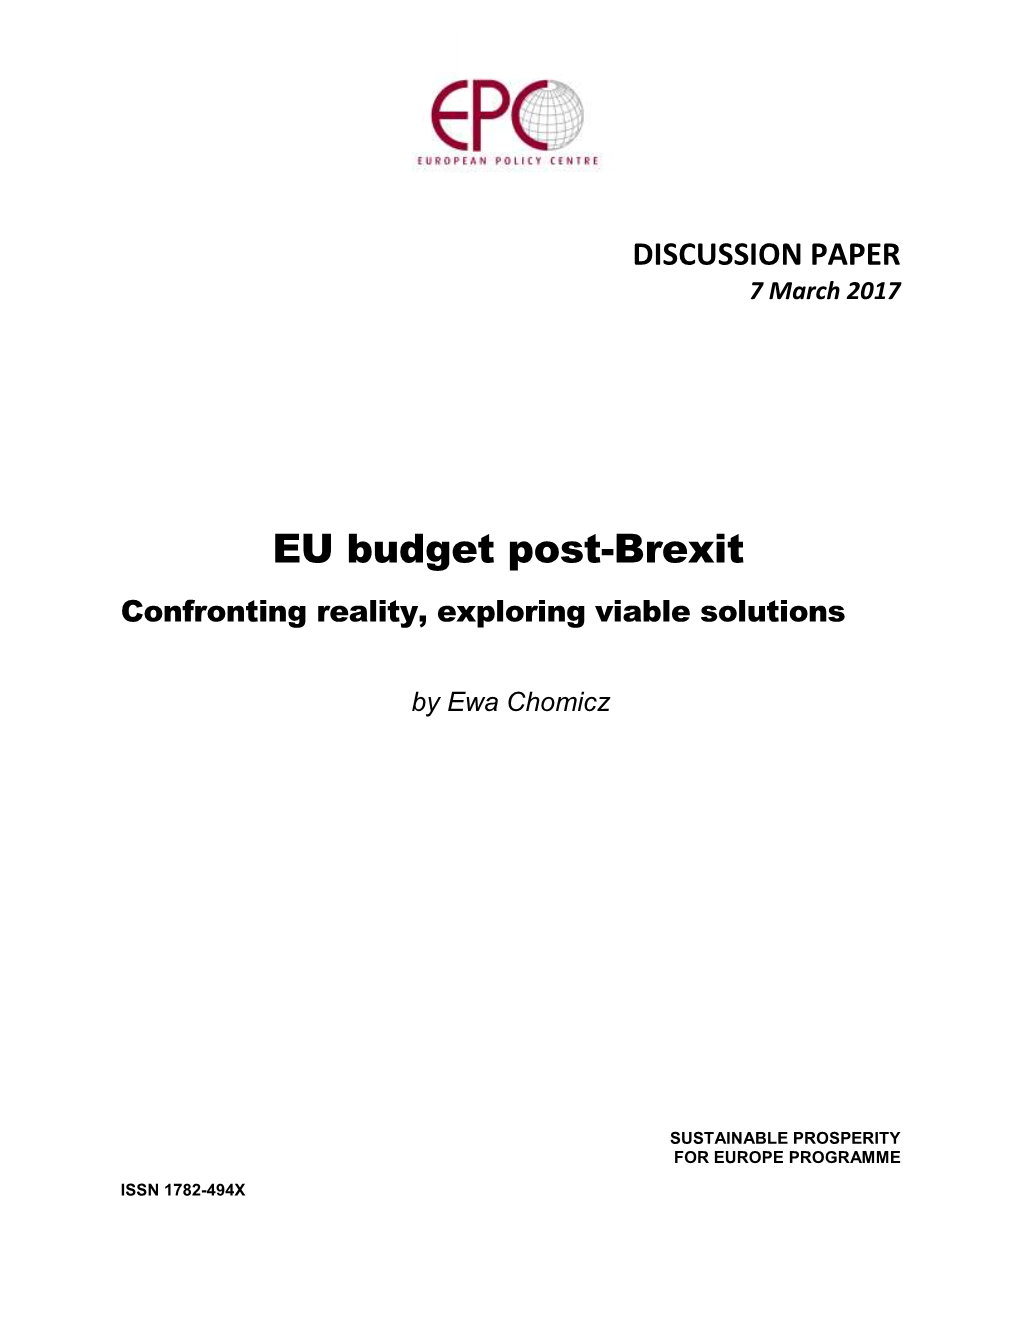 EU Budget Post-Brexit Confronting Reality, Exploring Viable Solutions